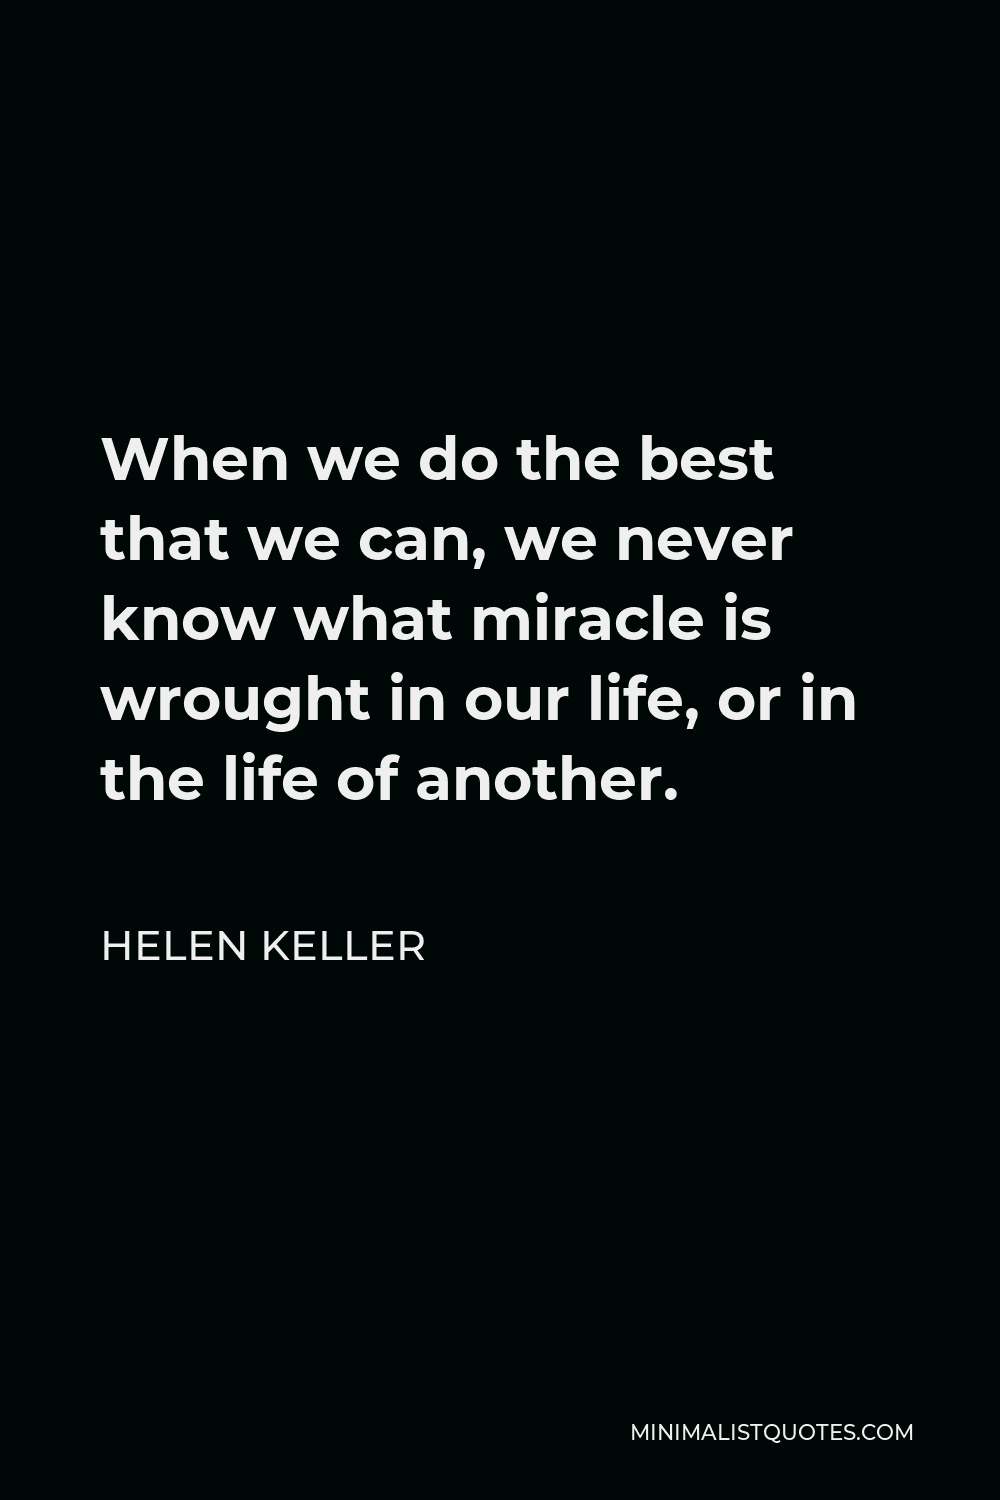 Helen Keller Quote - When we do the best that we can, we never know what miracle is wrought in our life, or in the life of another.